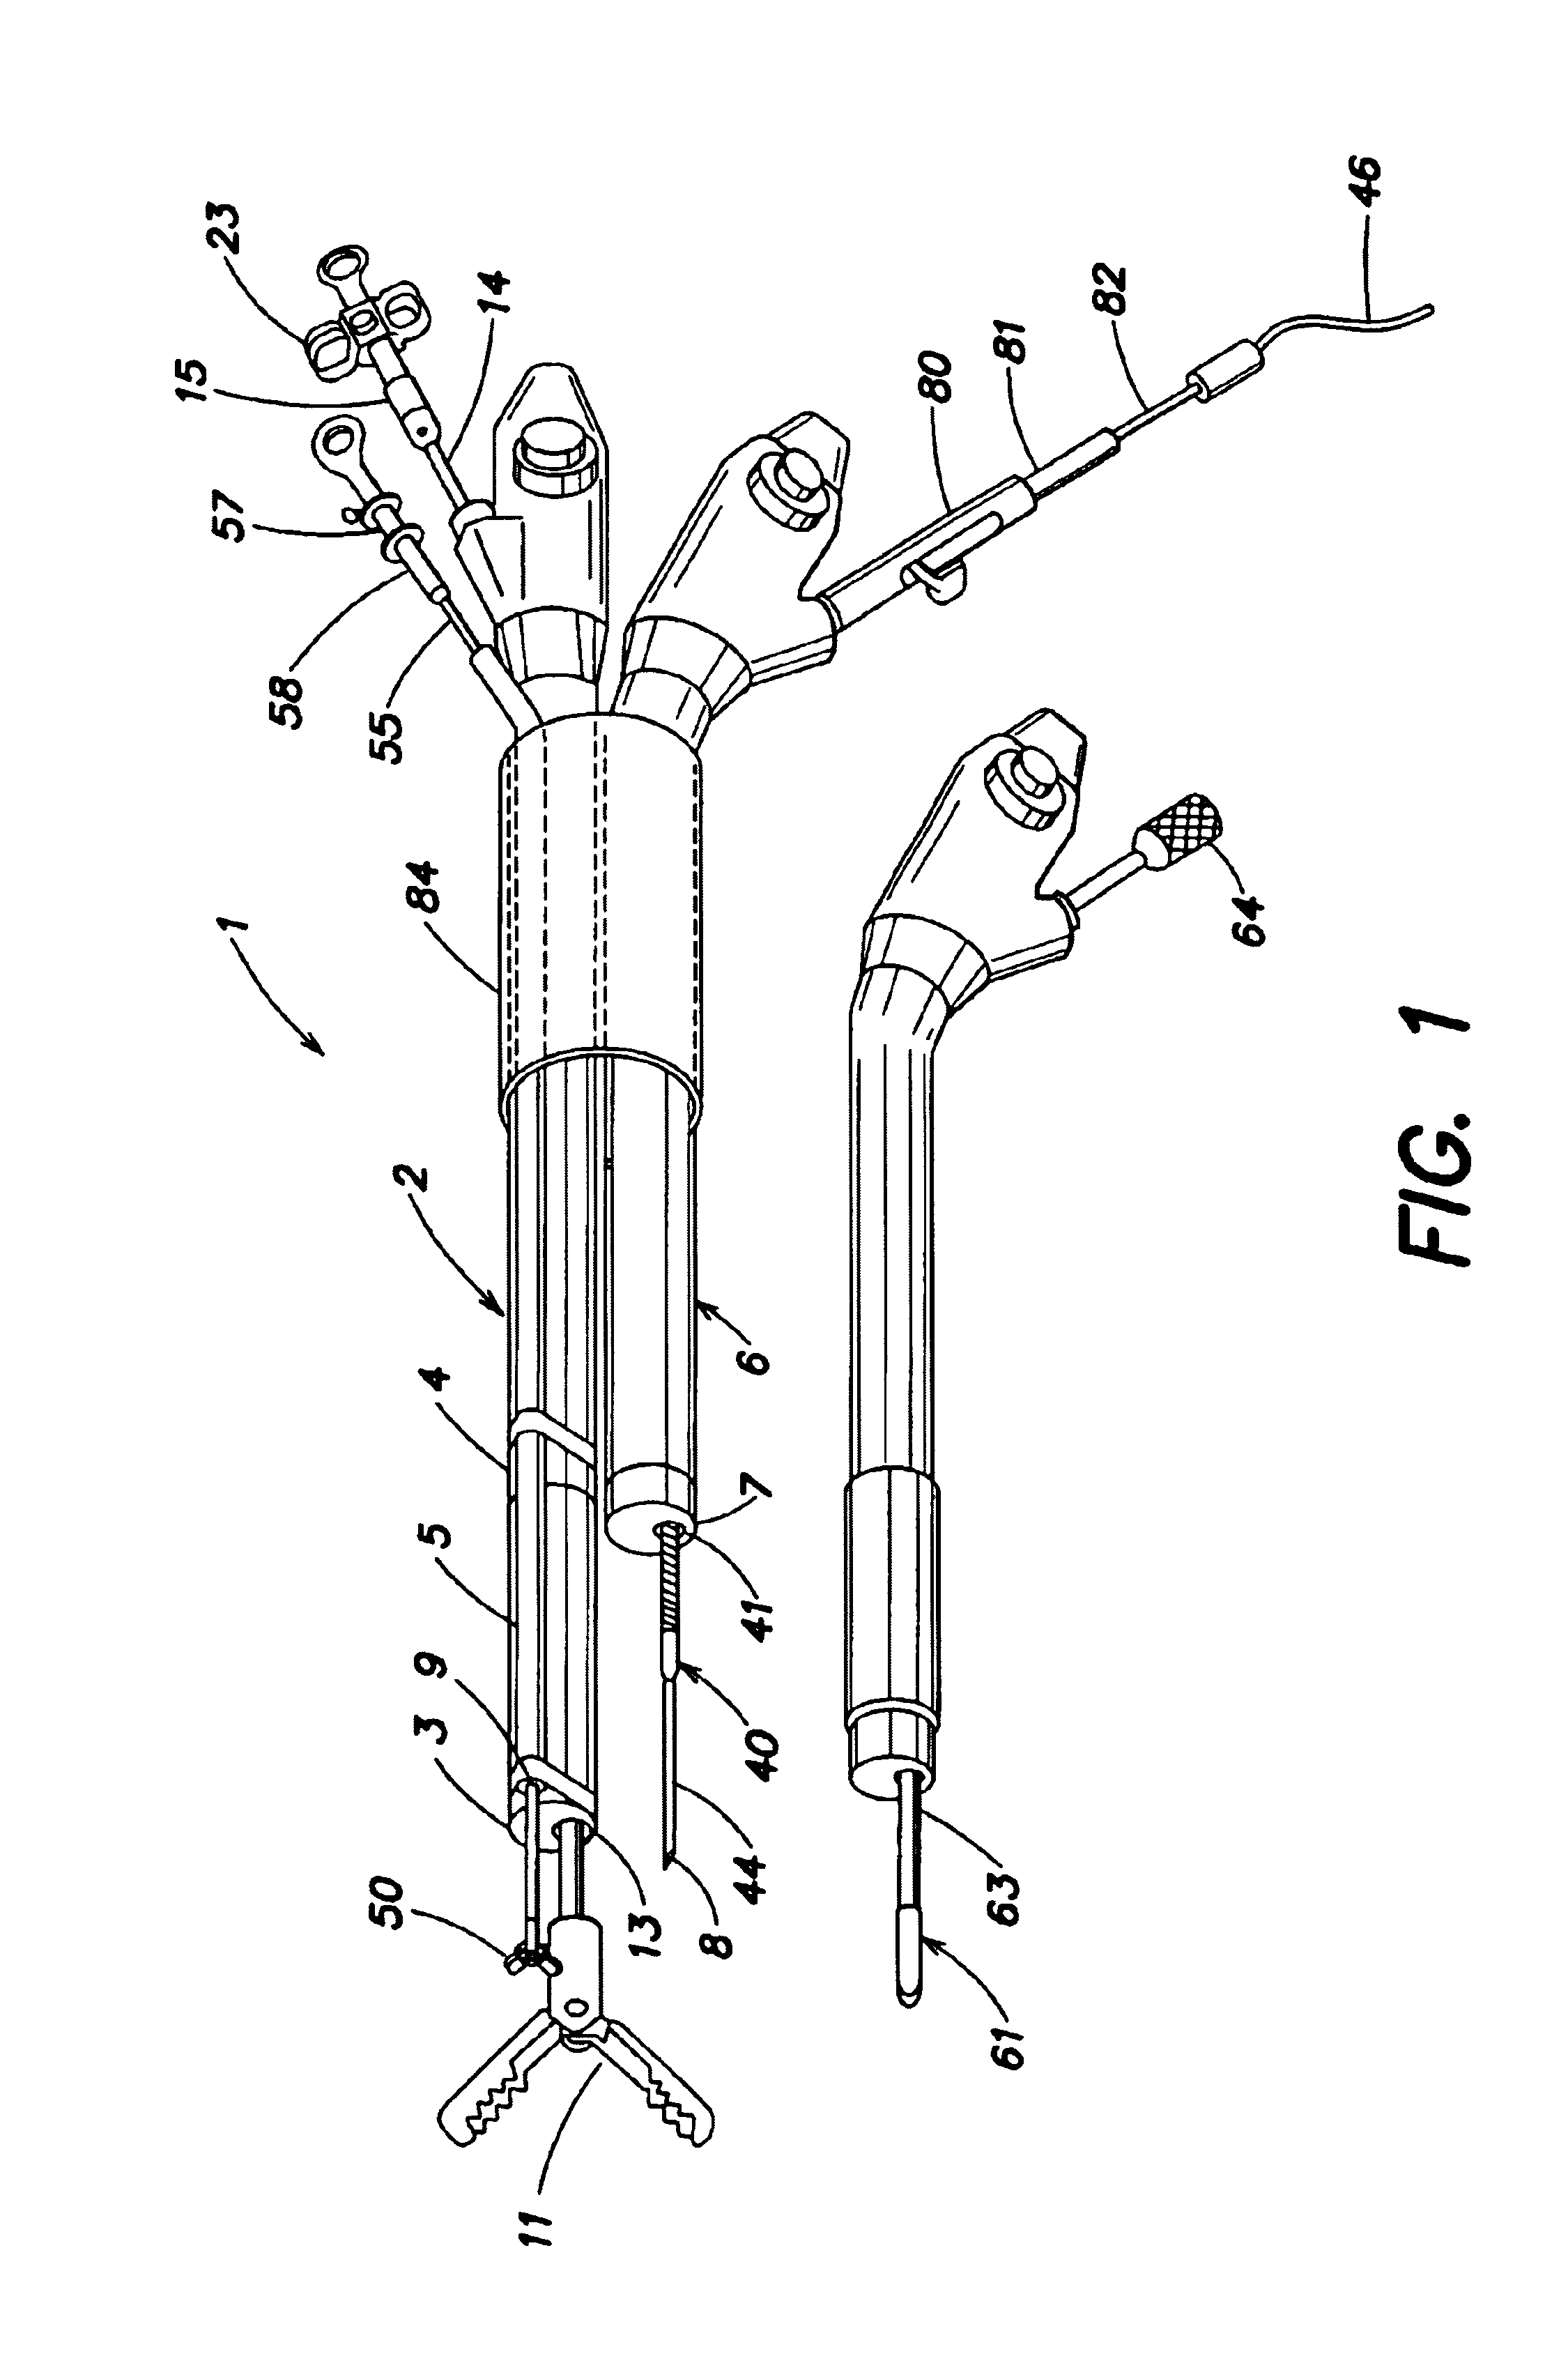 Endoscopic instrument for forming an artificial valve